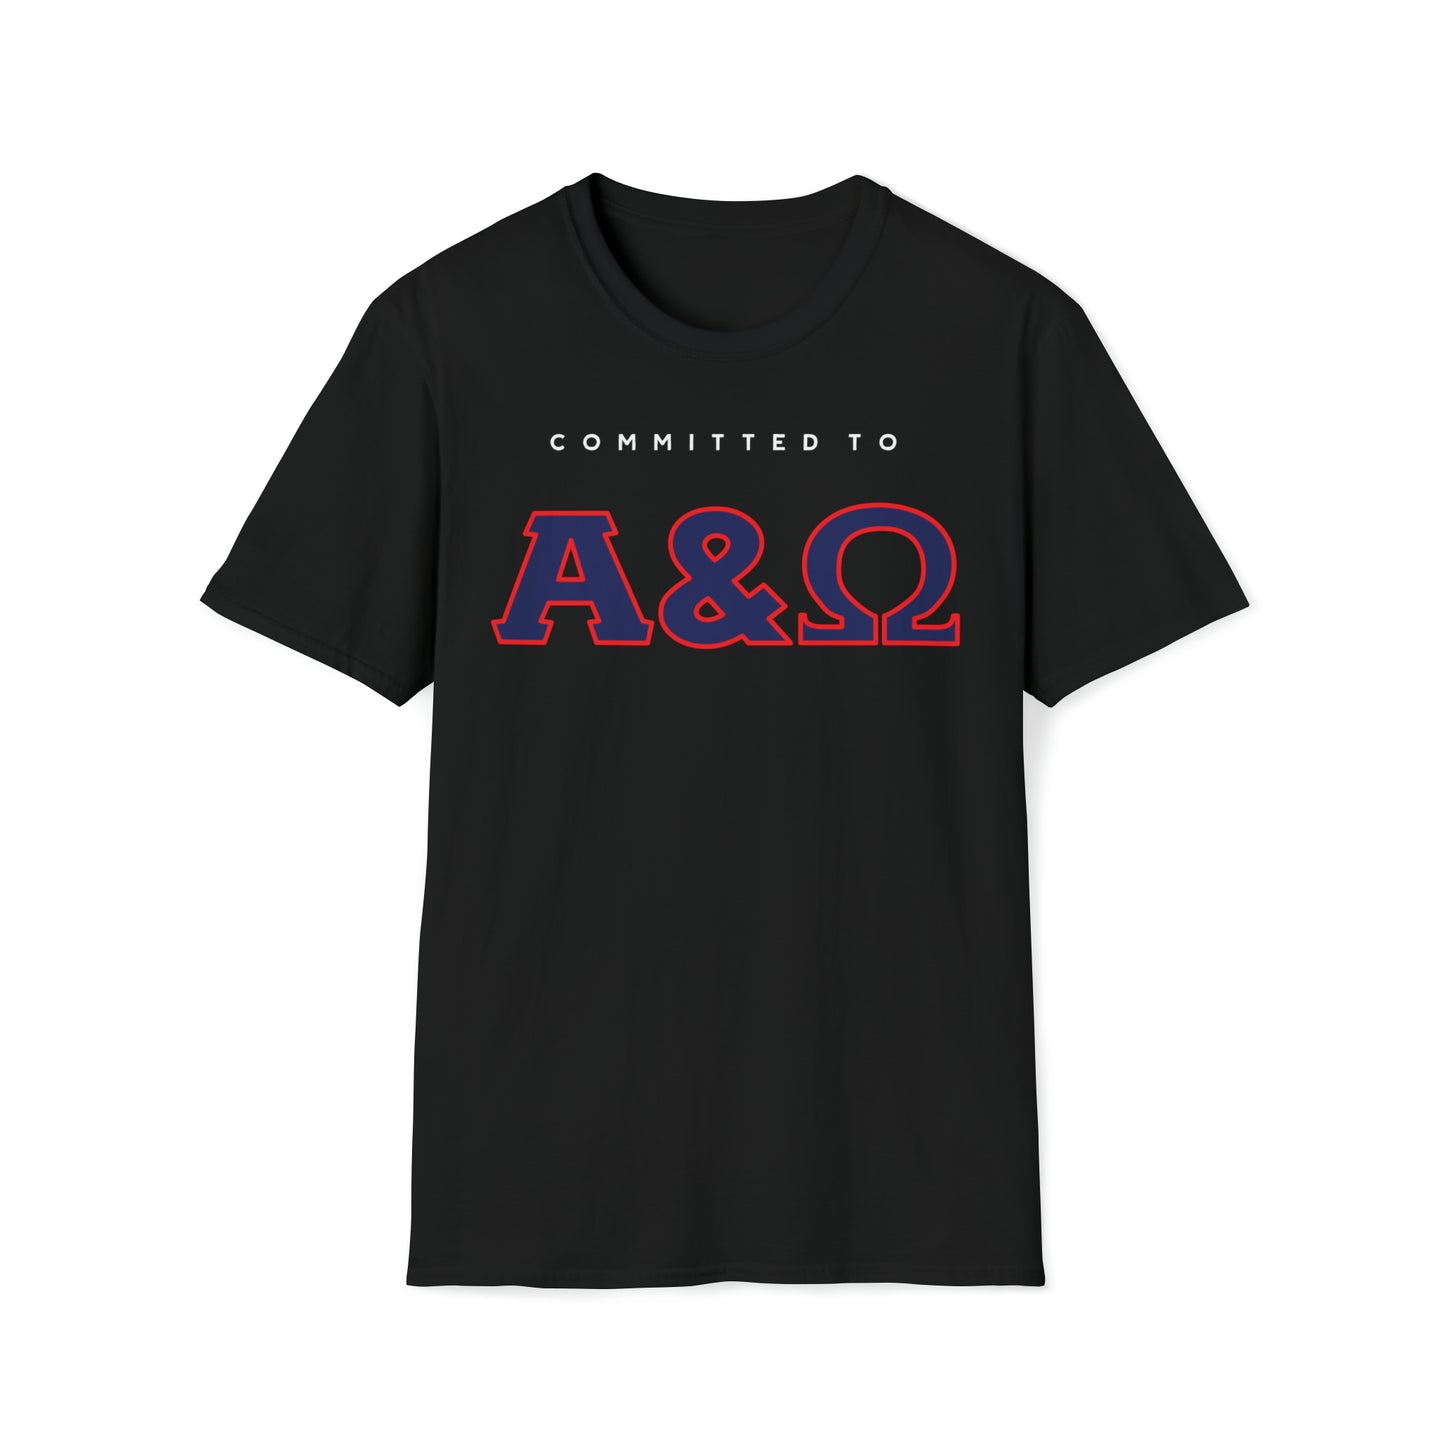 Committed to Alpha & Omega - Christian T shirt, Christian Message